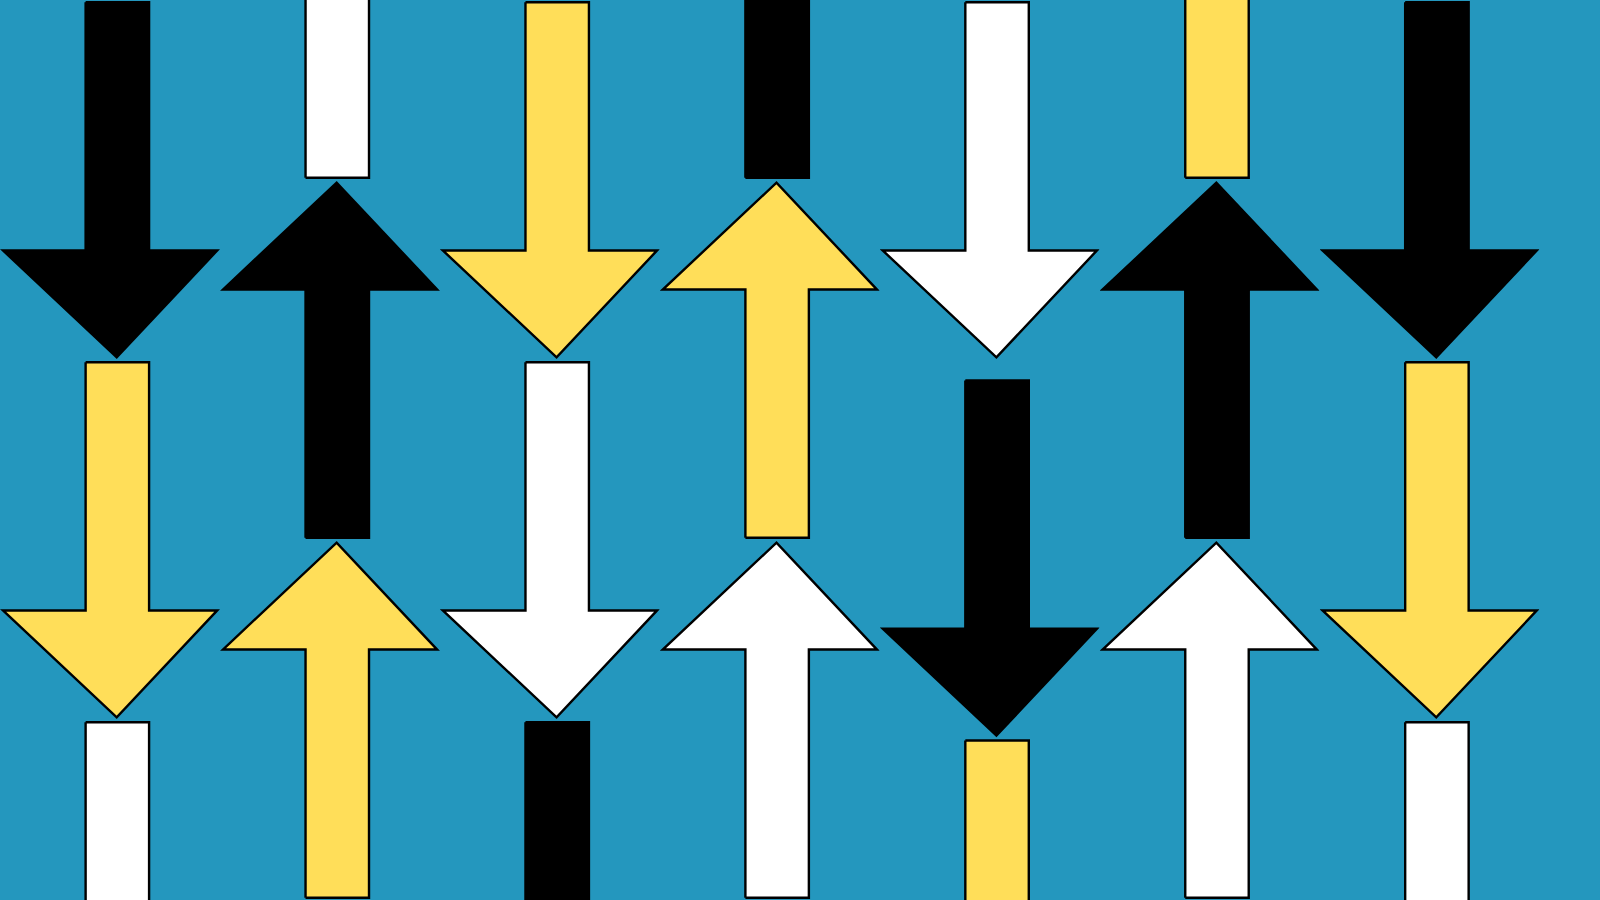 Arrows pointing up and down